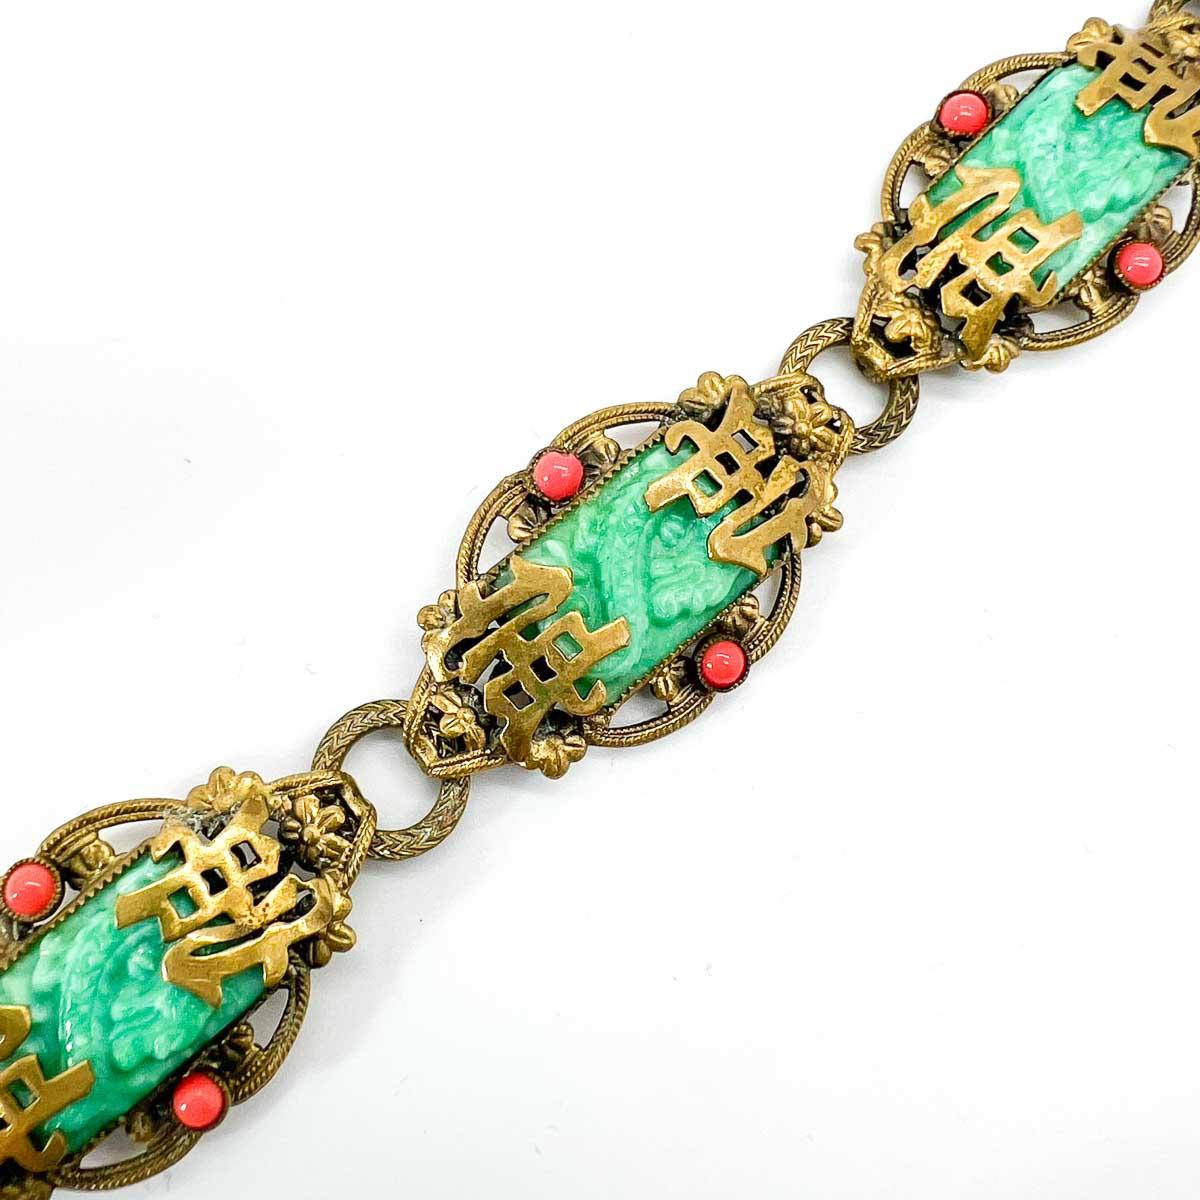 A lovely genuine example of the Neiger Brother’s much sought after Chinoiserie style jewellery. An antique Neiger Chinoiserie bracelet from the 1920s. The best Neiger pieces are loaded with detail and design and this one is no exception with Chinese